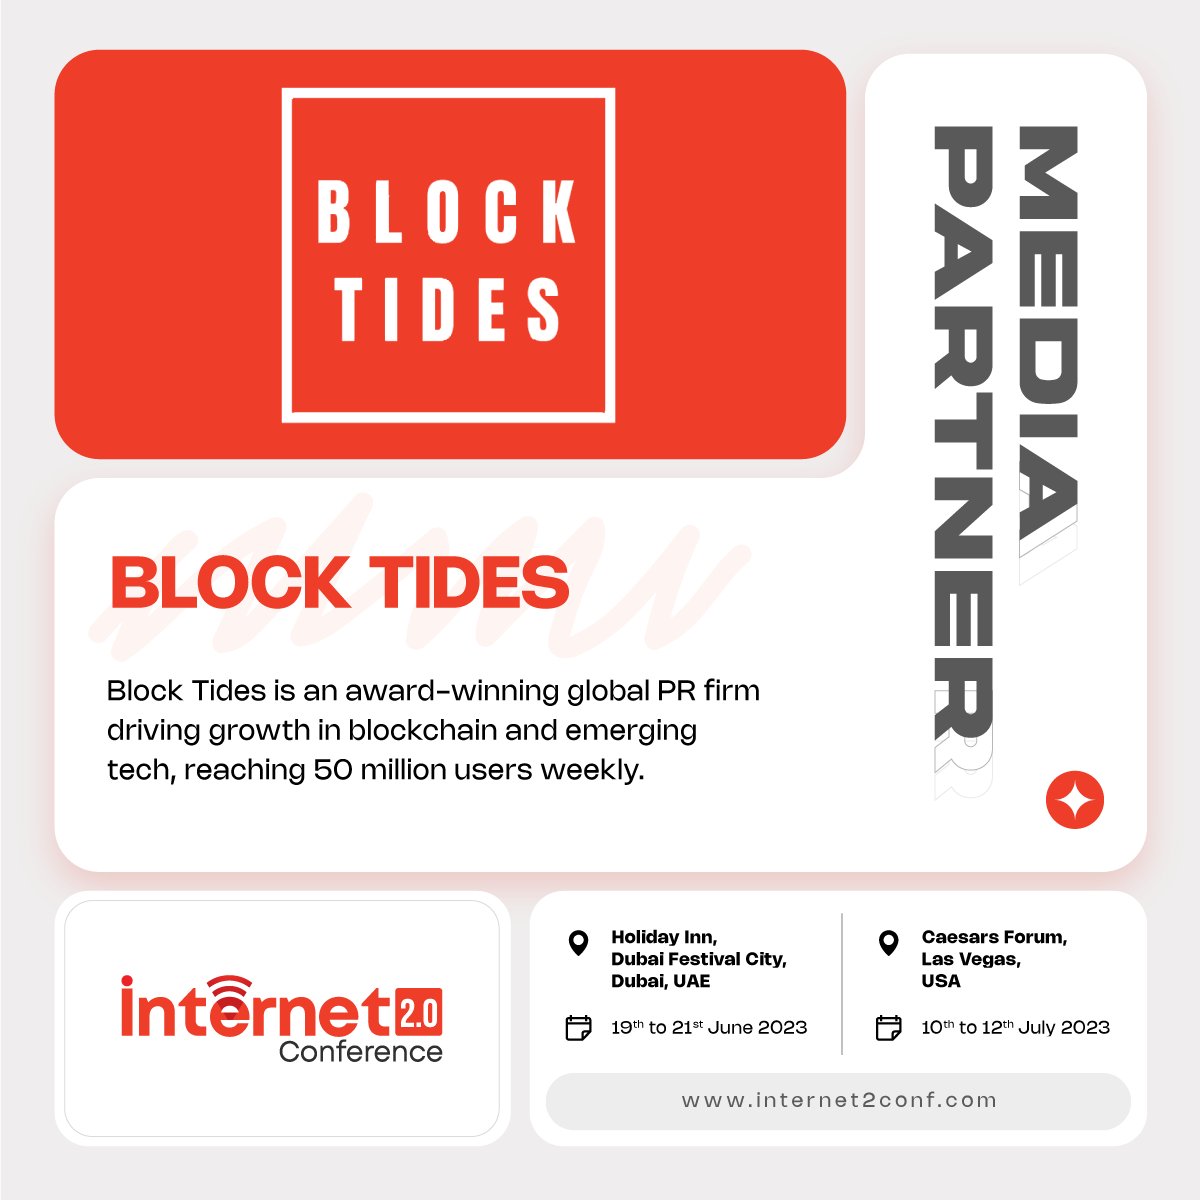 We are thrilled to introduce Block Tides, the renowned global PR and Marketing powerhouse, as the official #MediaPartner for #Internet2Conf. Block Tides' expansive digital reach and innovative strategies will catapult our event to unprecedented heights.
#Connect #Network